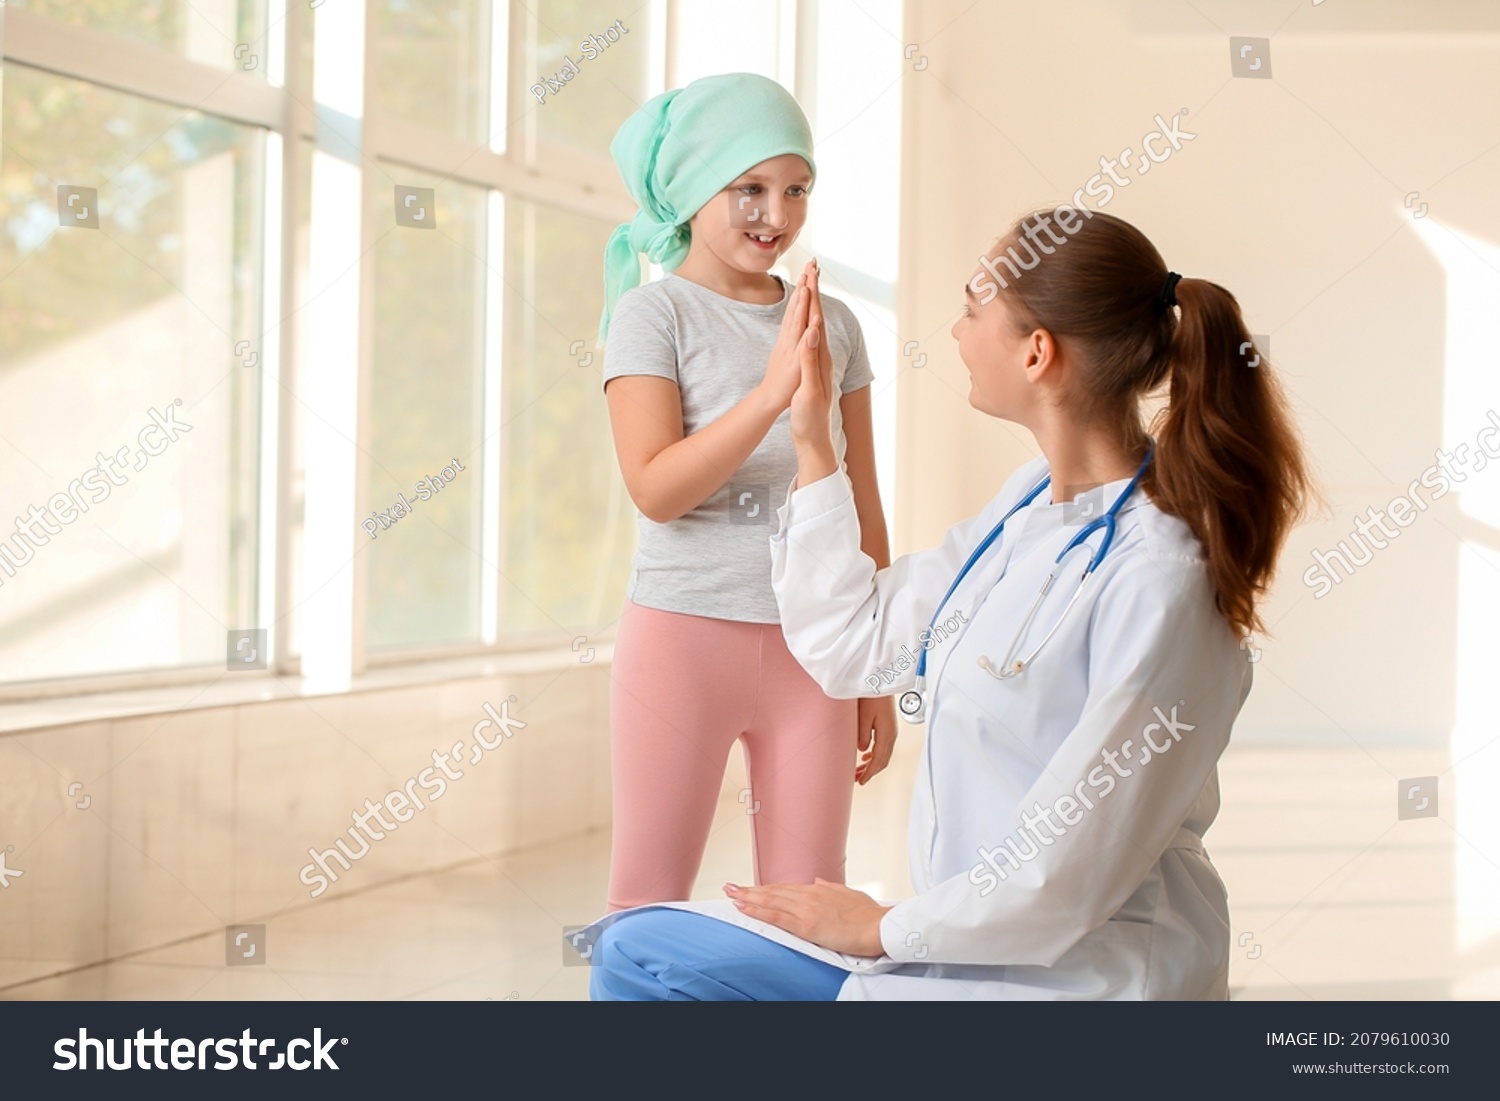 Doctor and little girl in clinic. Childhood cancer awareness concept #2079610030